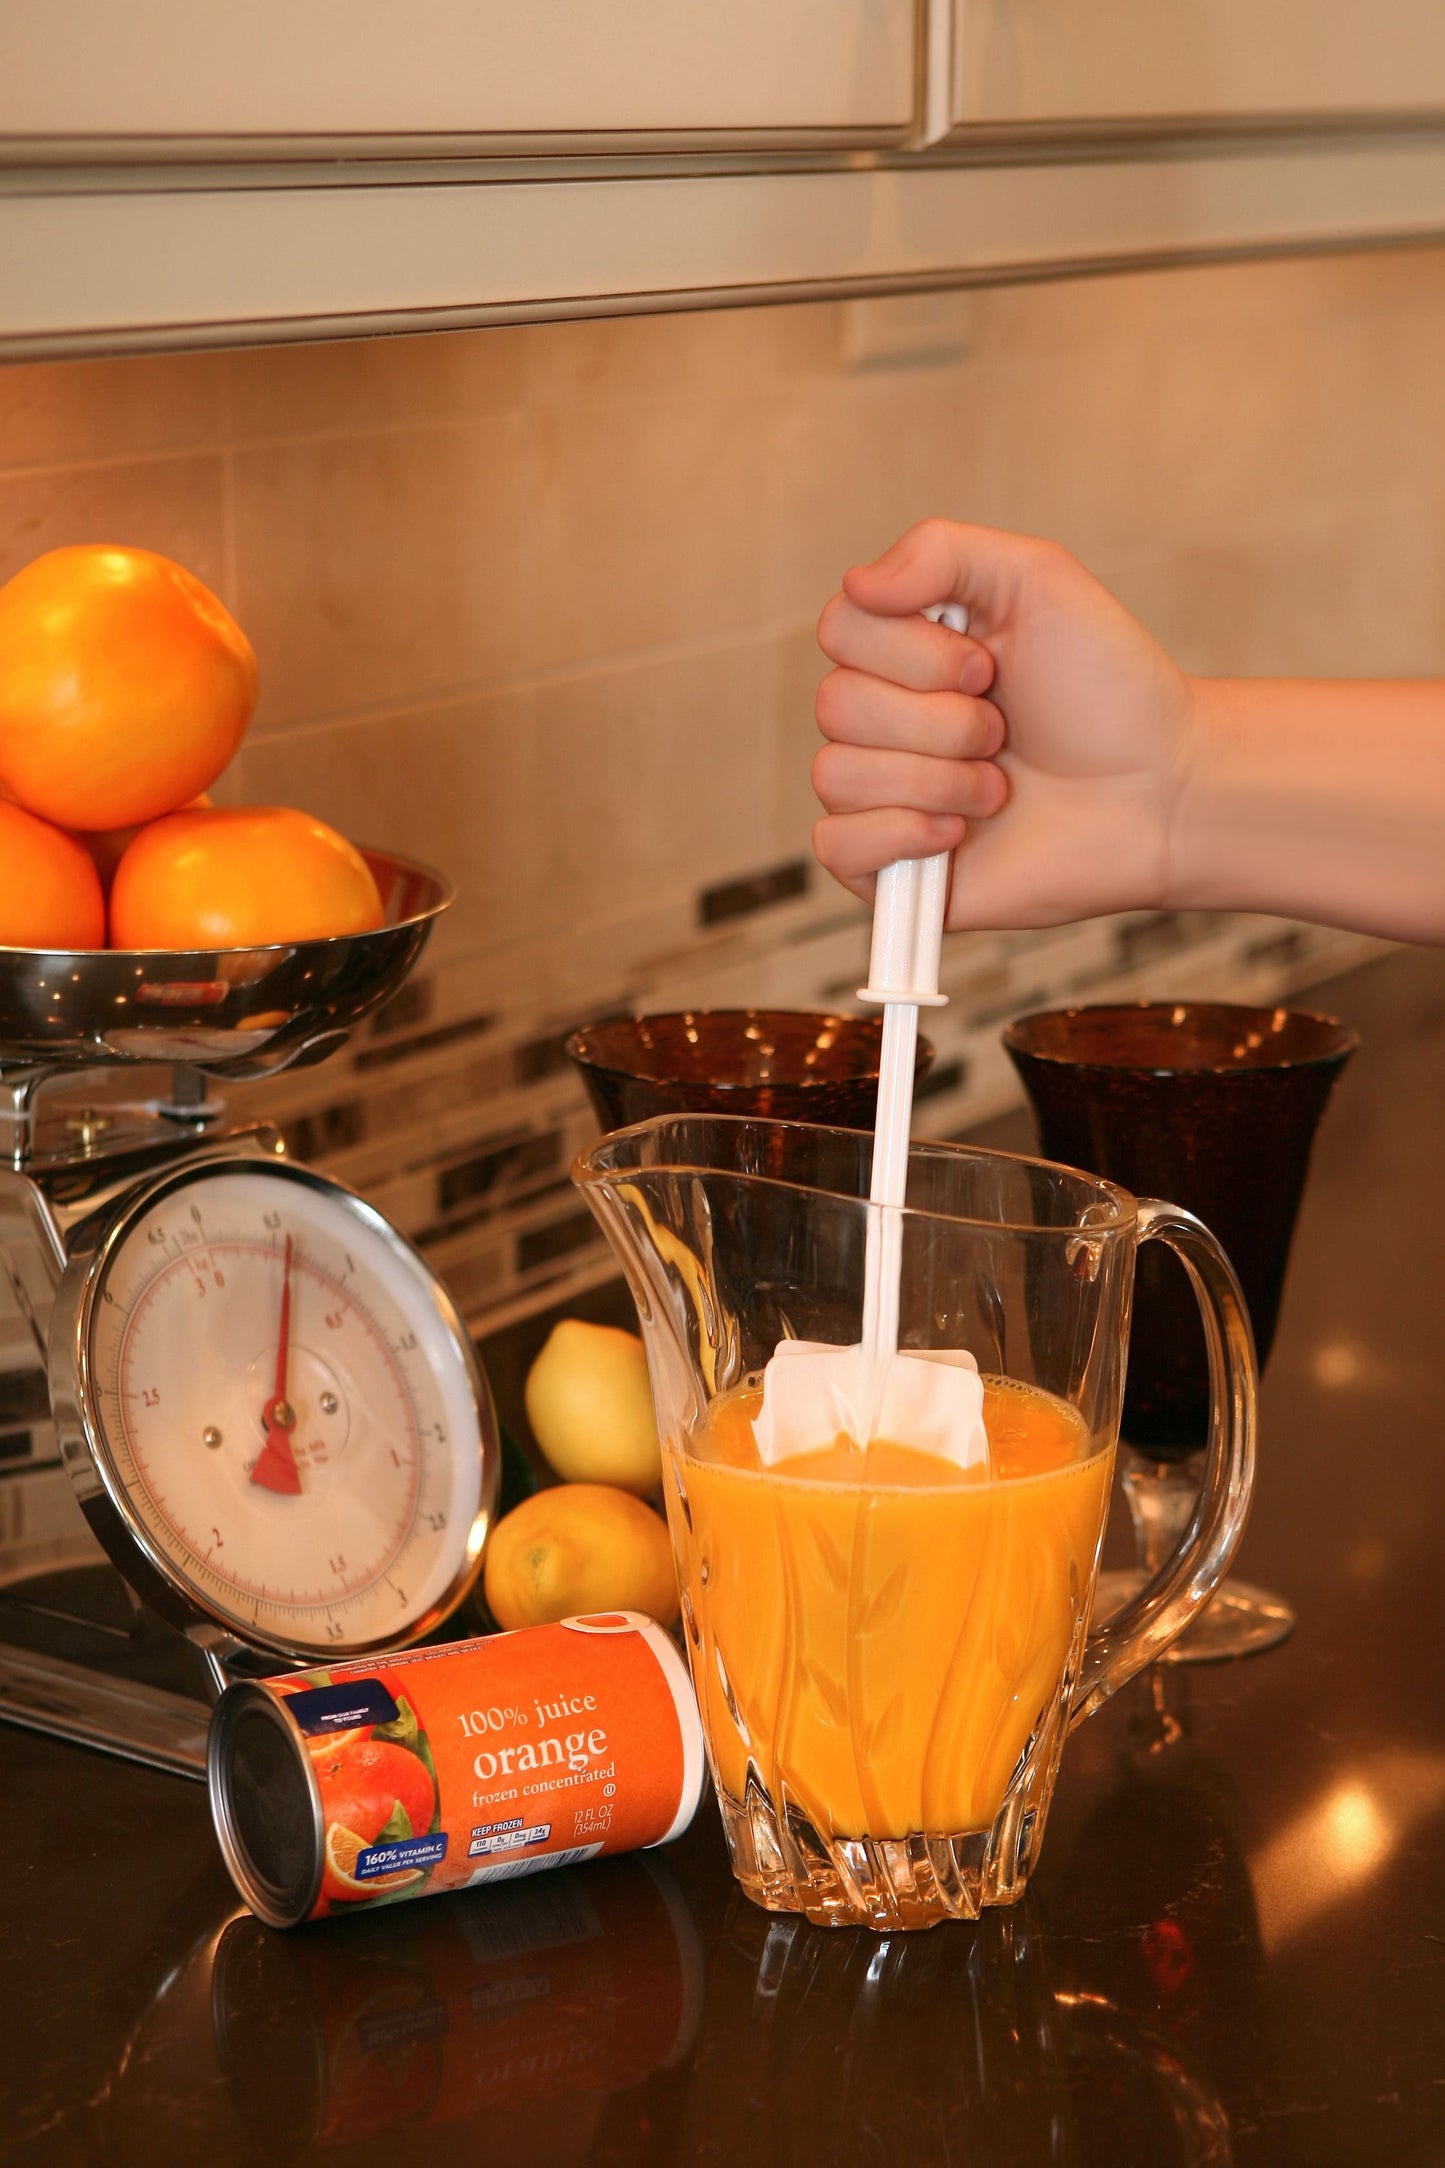 illustration of the white chopstir being used with a pitcher of frozen juice in a kitchen